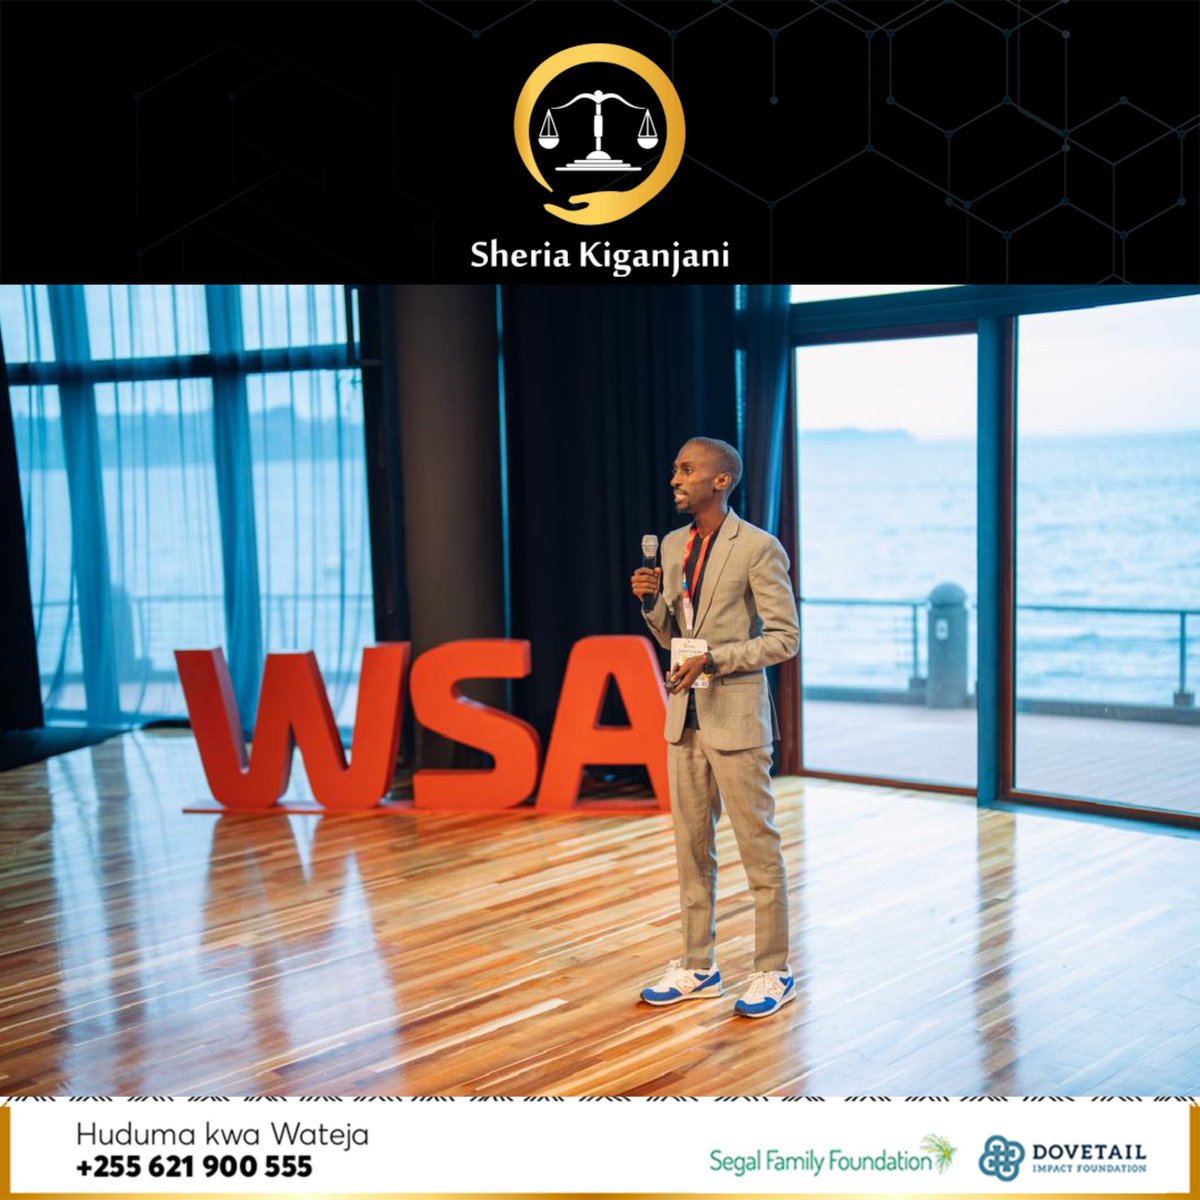 As an avenue of forming formidable partnerships and networking with fellow innovators and change makers, Sheria Kiganjani represented by our CEO @JjNabiry , participated in the @WSAoffice Global Congress held in Chile 🇨🇱 from 14th to 17th April.